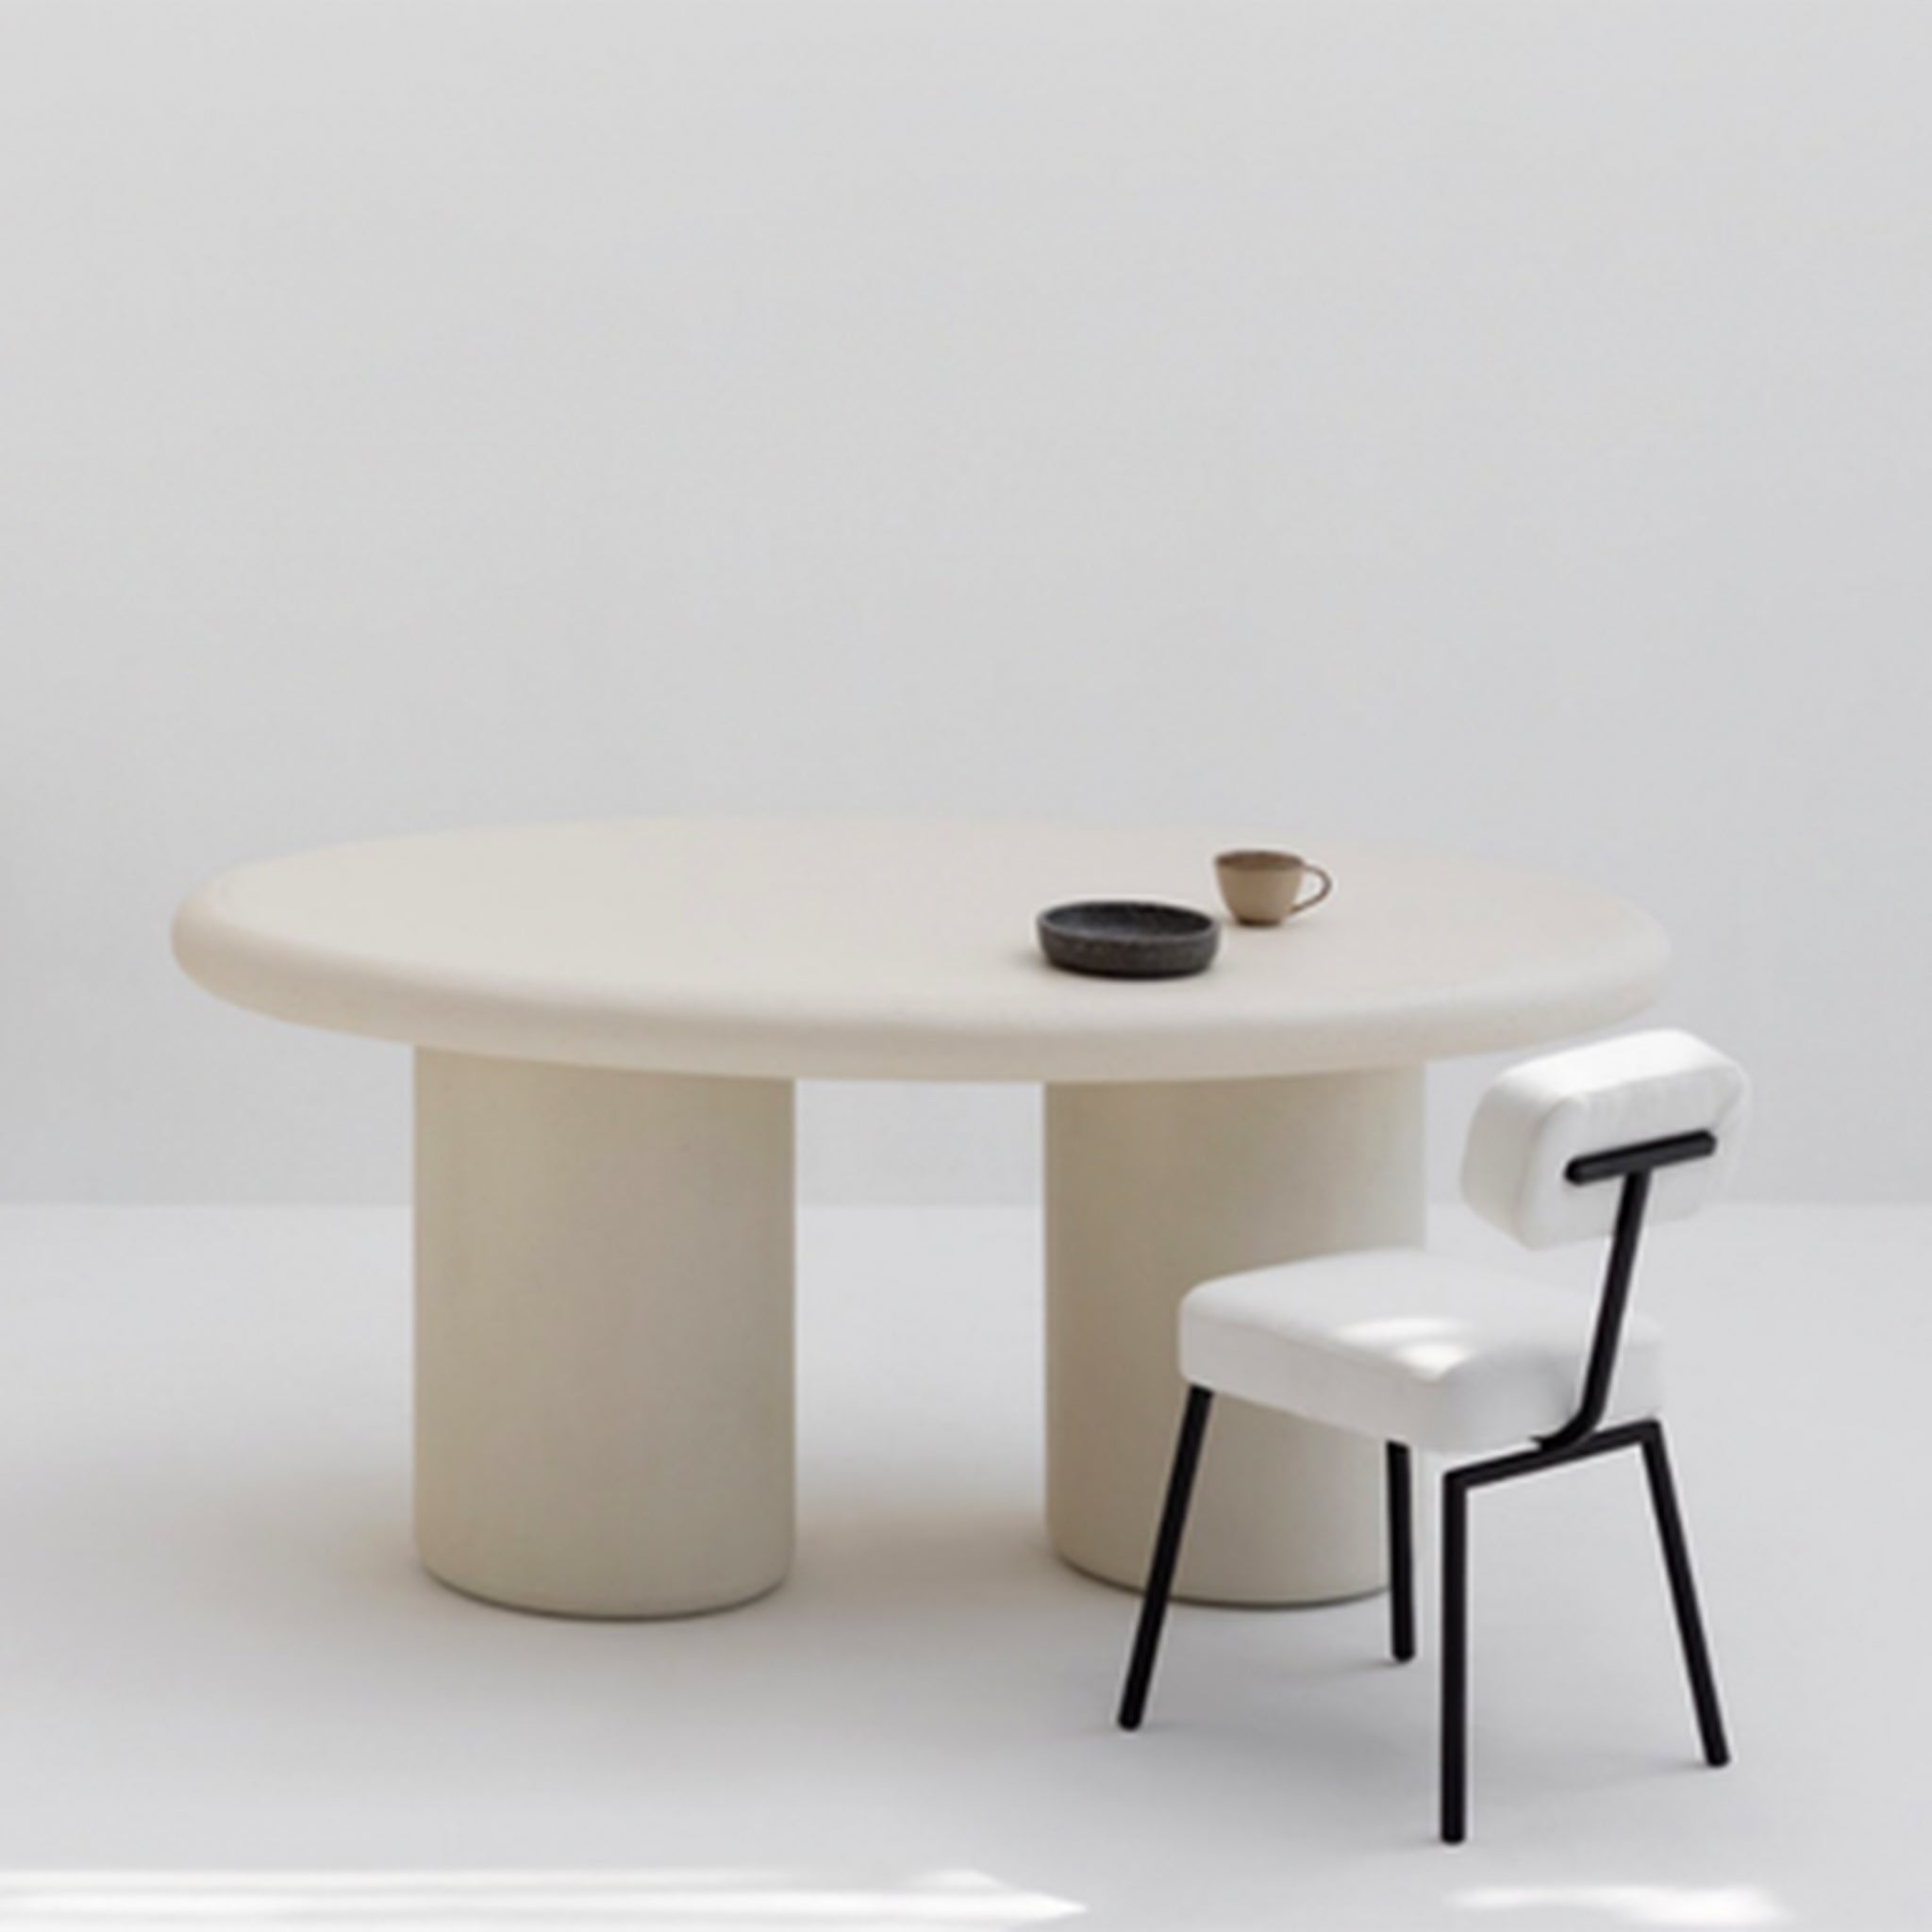 The Ida Dining Chair - sleek black steel frame with white cushioned seat and backrest, paired with a modern round dining table in a minimalist setting.